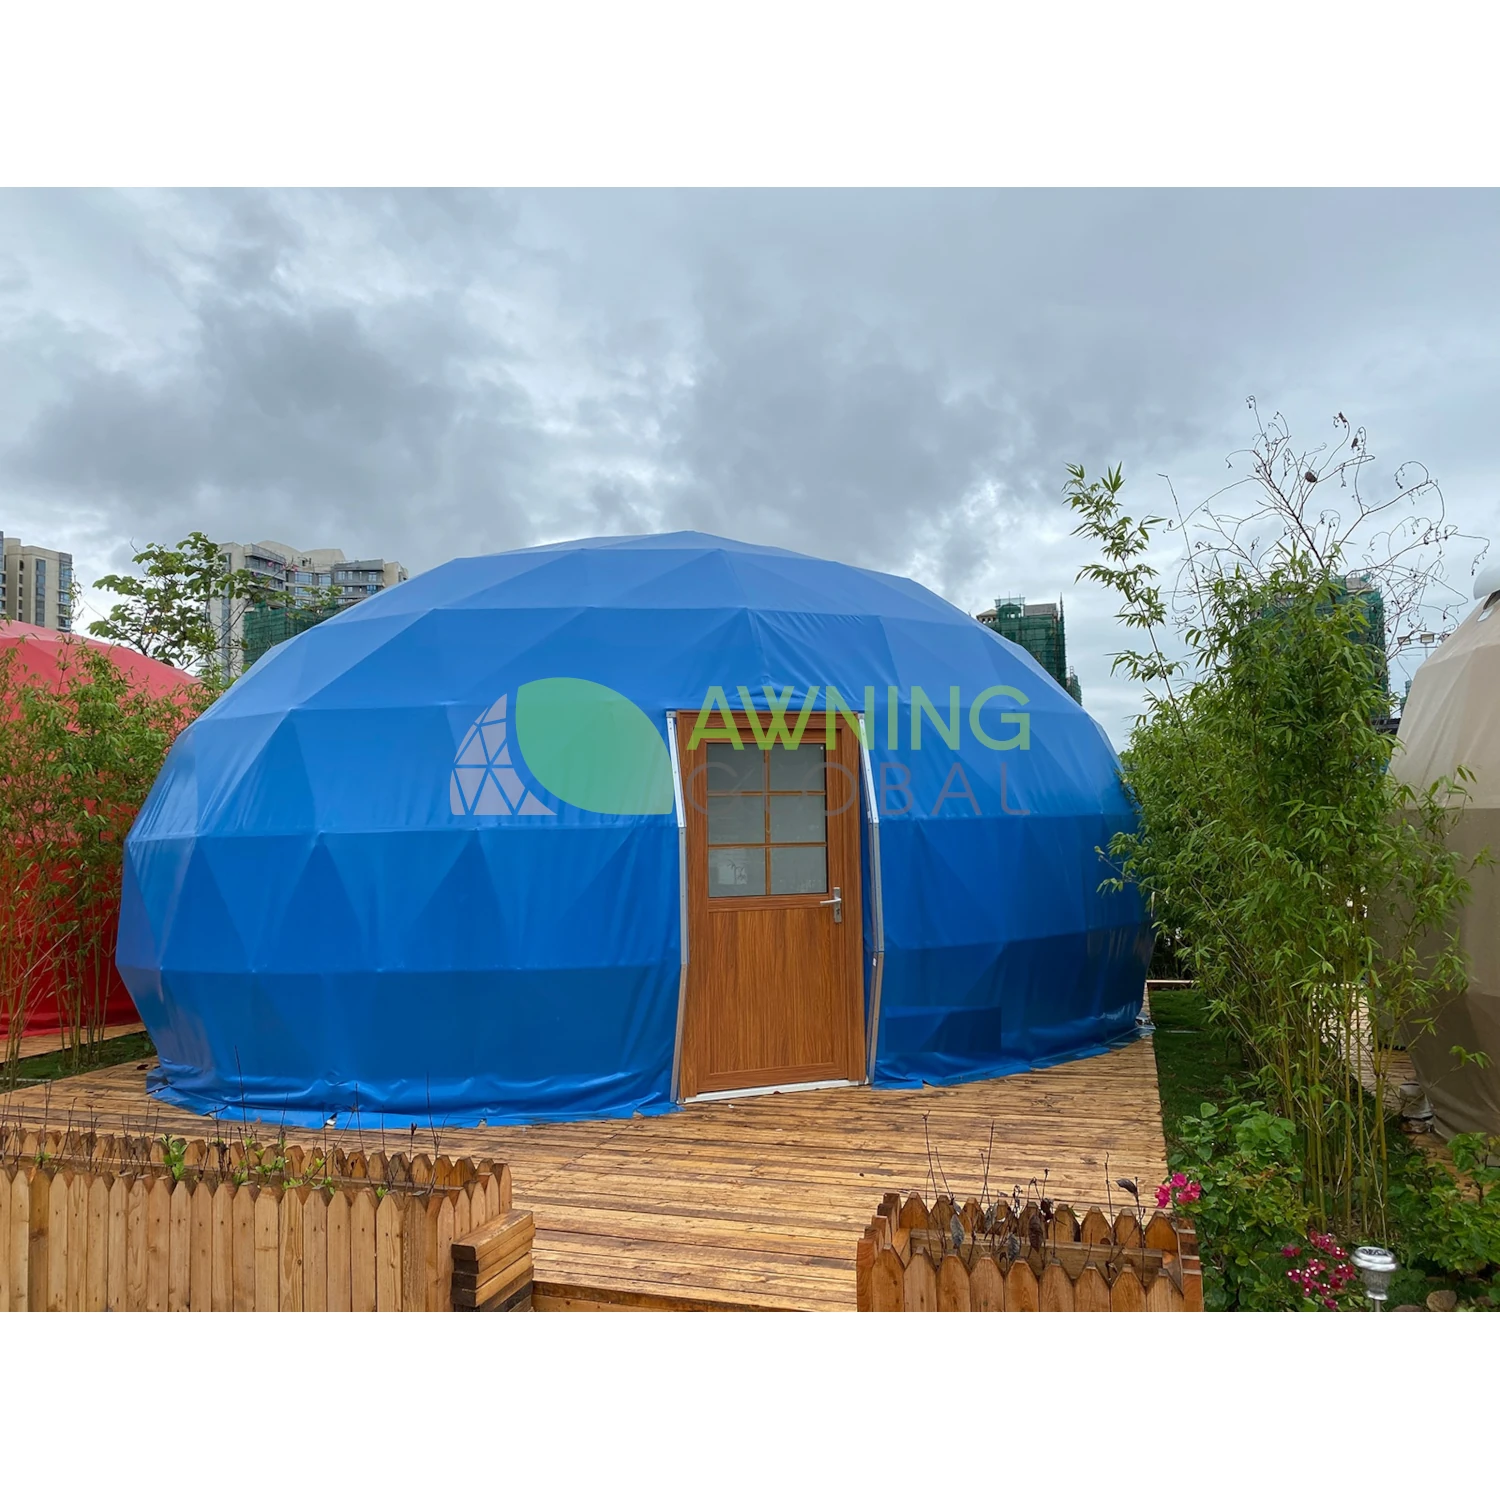 Glamping-dome-tent-oval-shape (3)